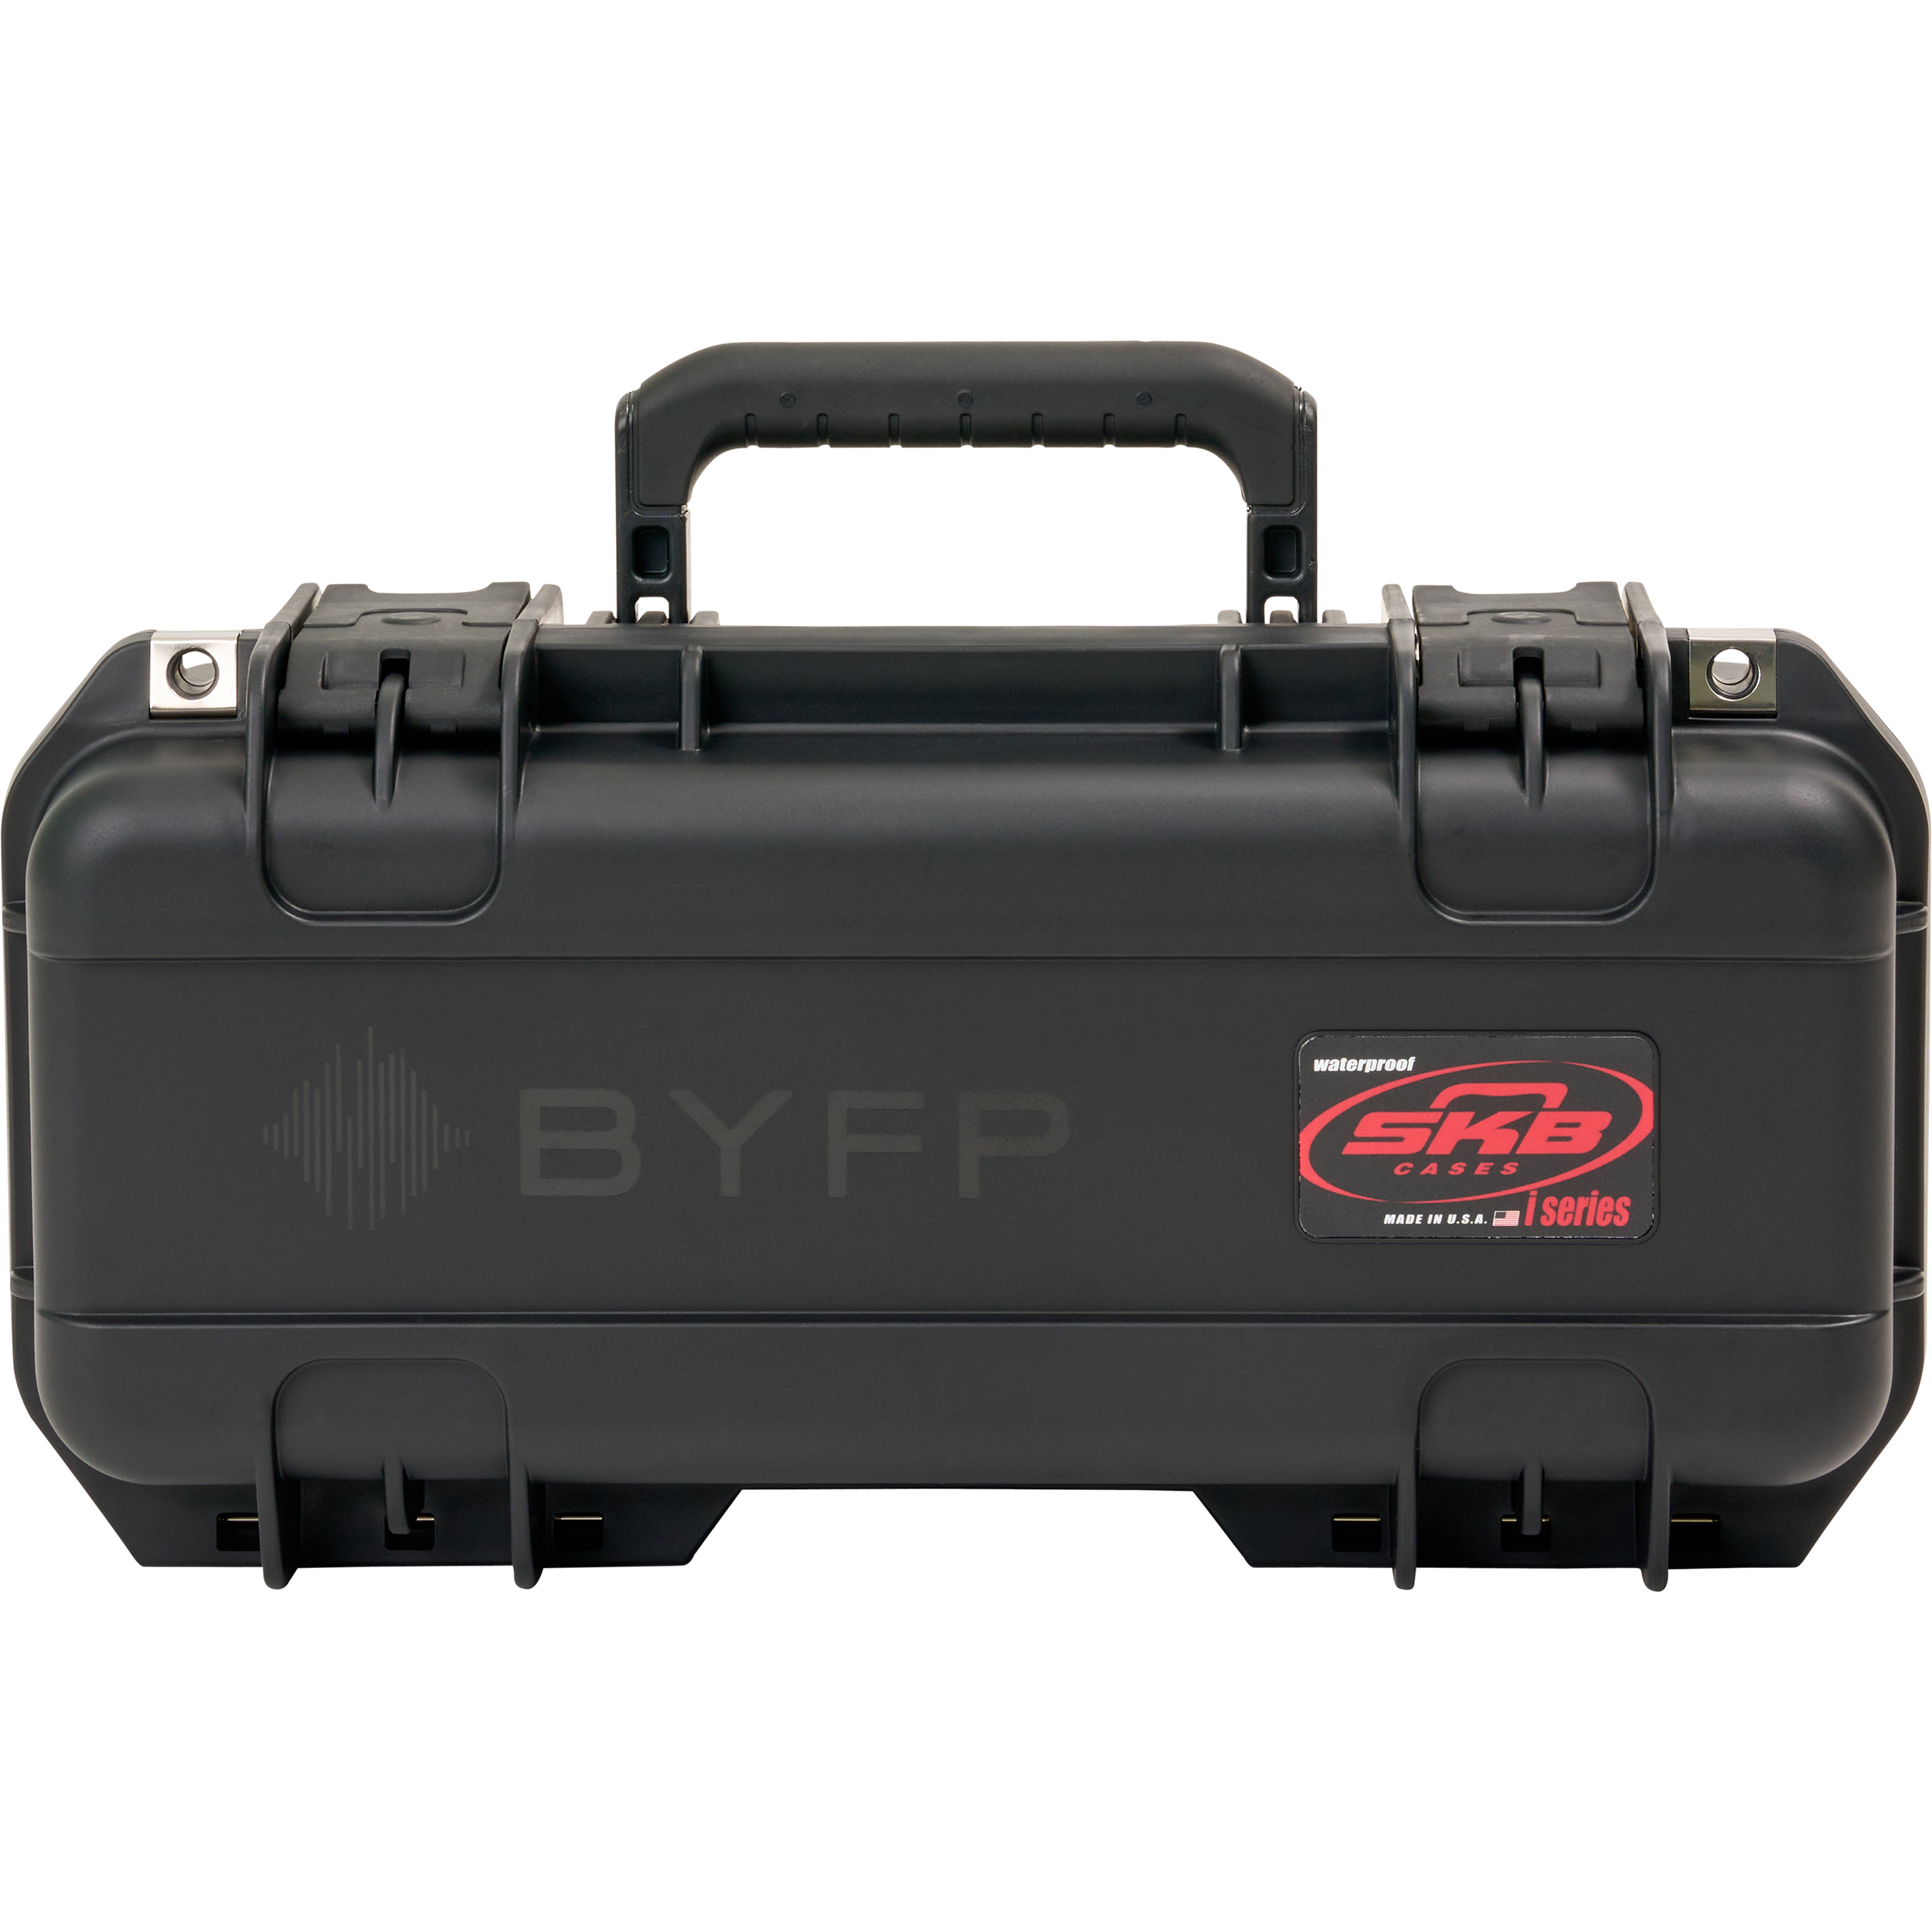 BYFP ipCase for Roland V-1HD+